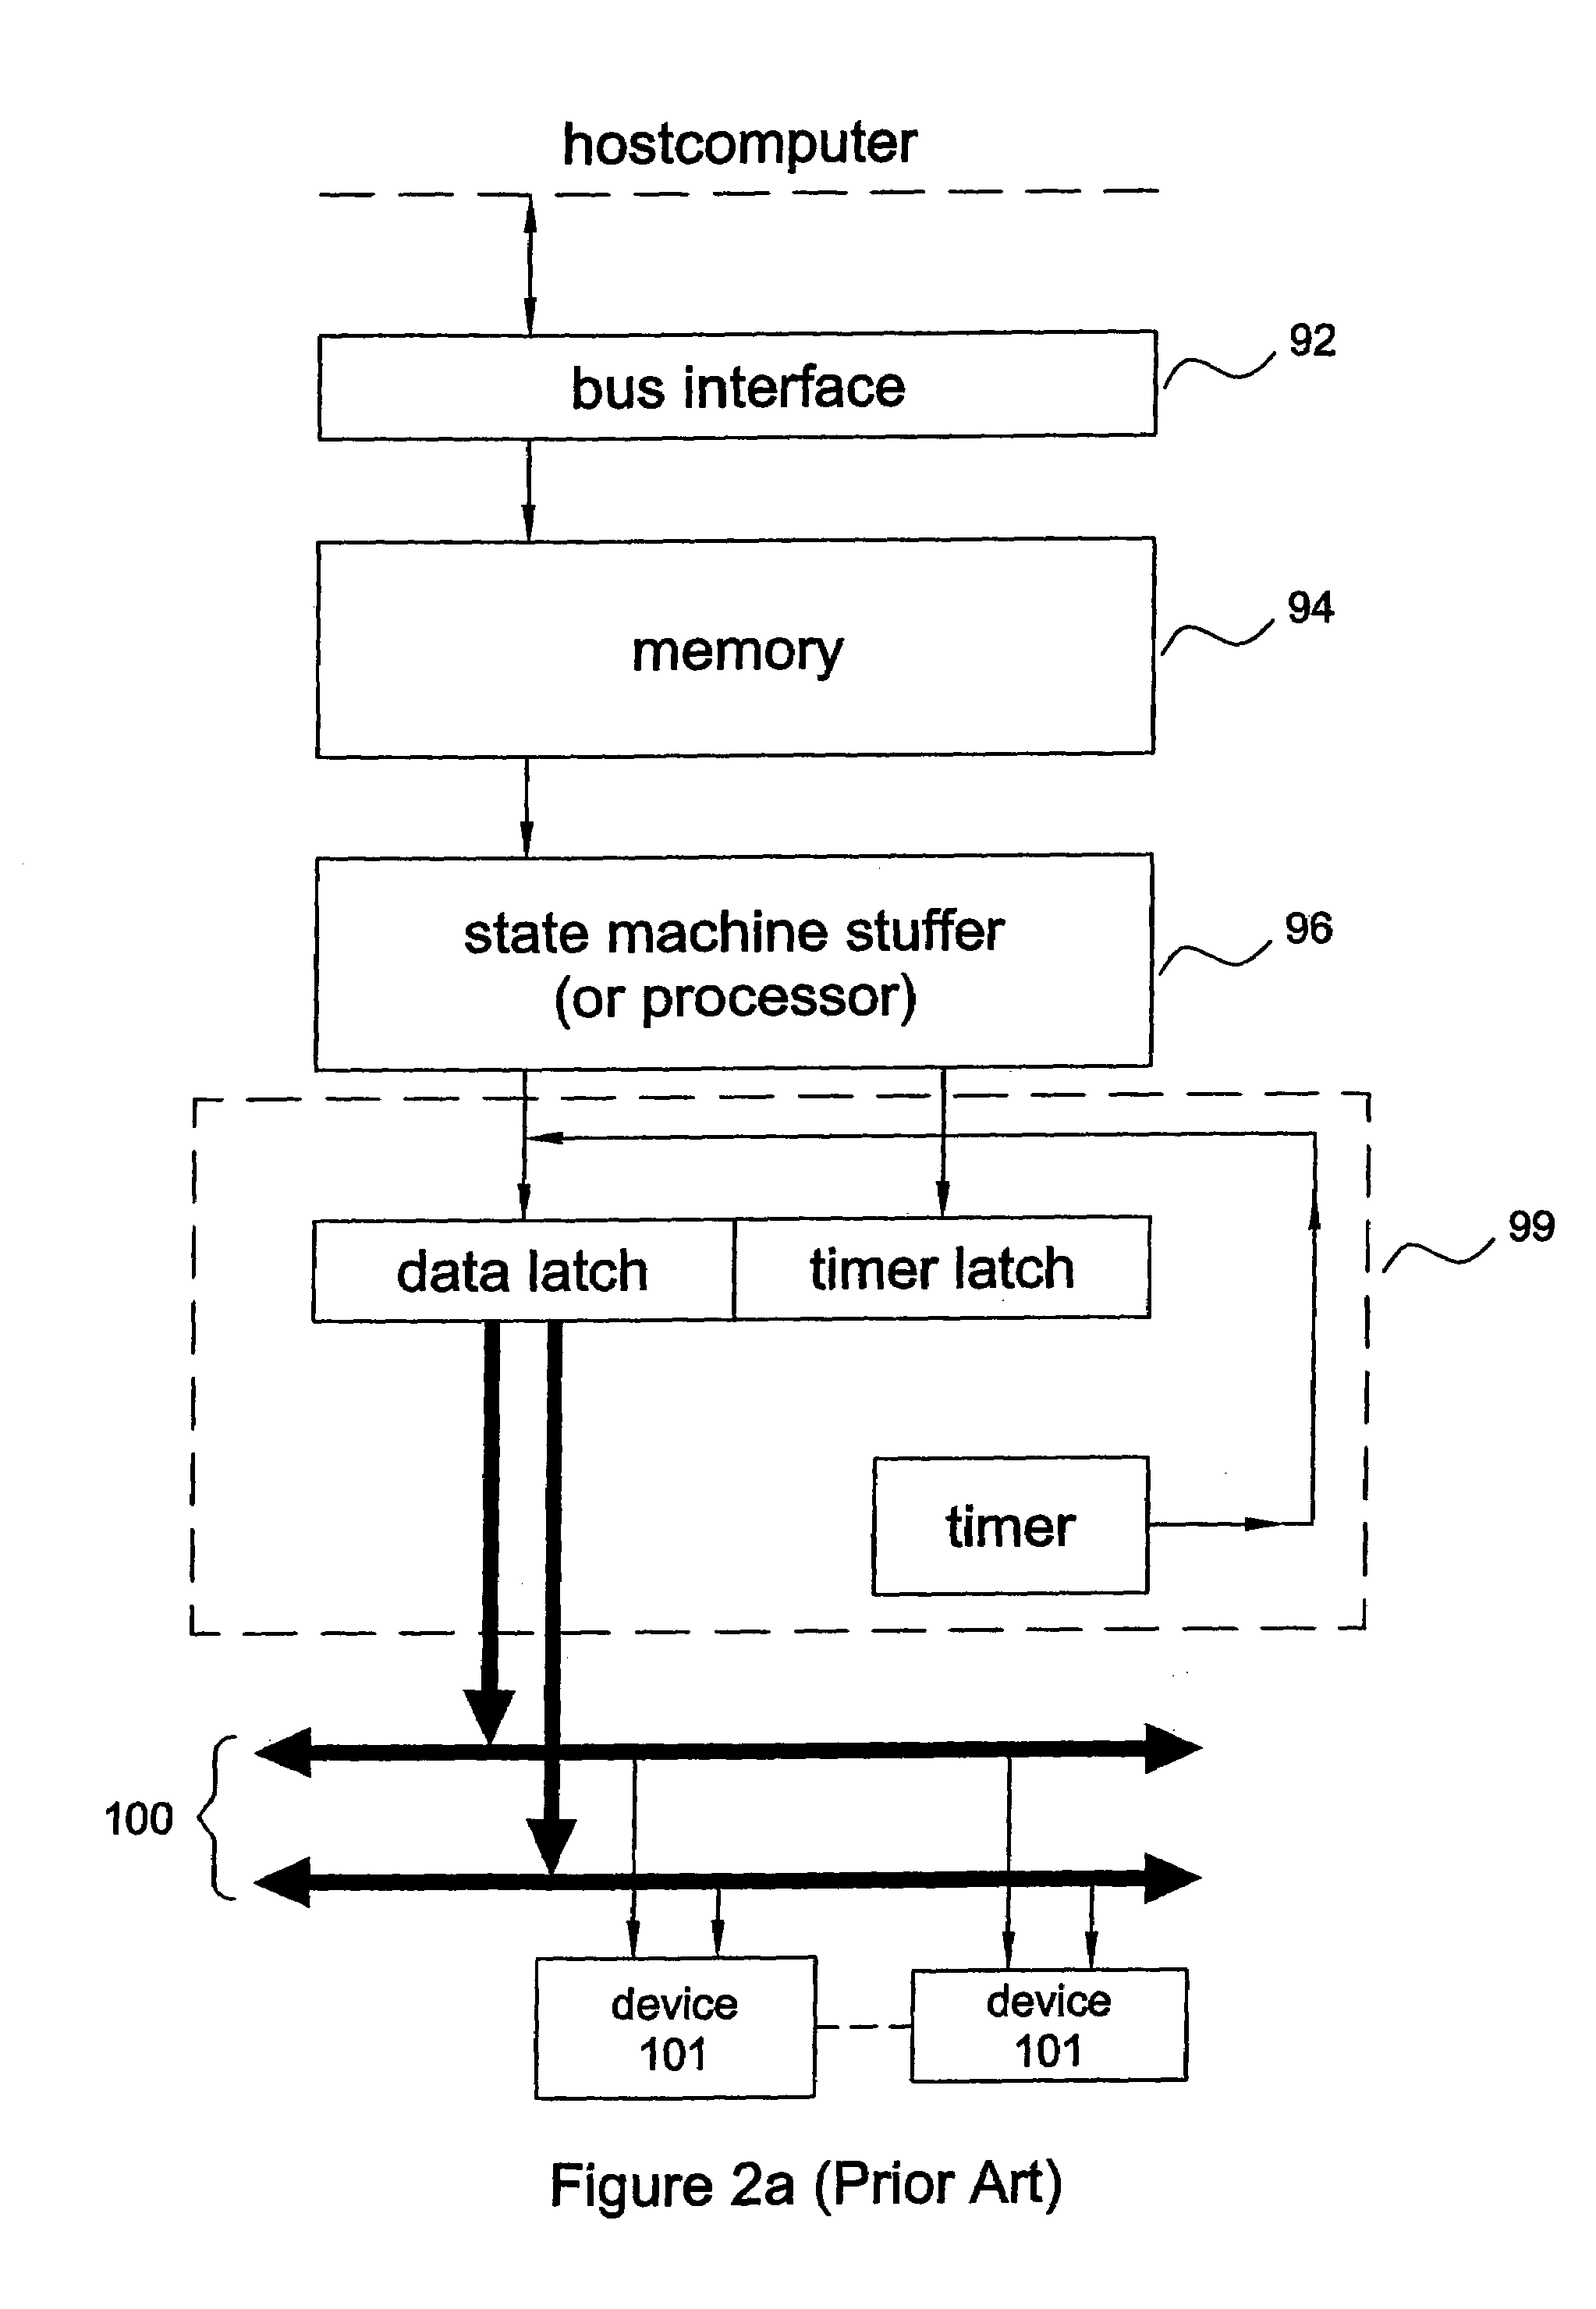 Optimized channel controller for NMR apparatus